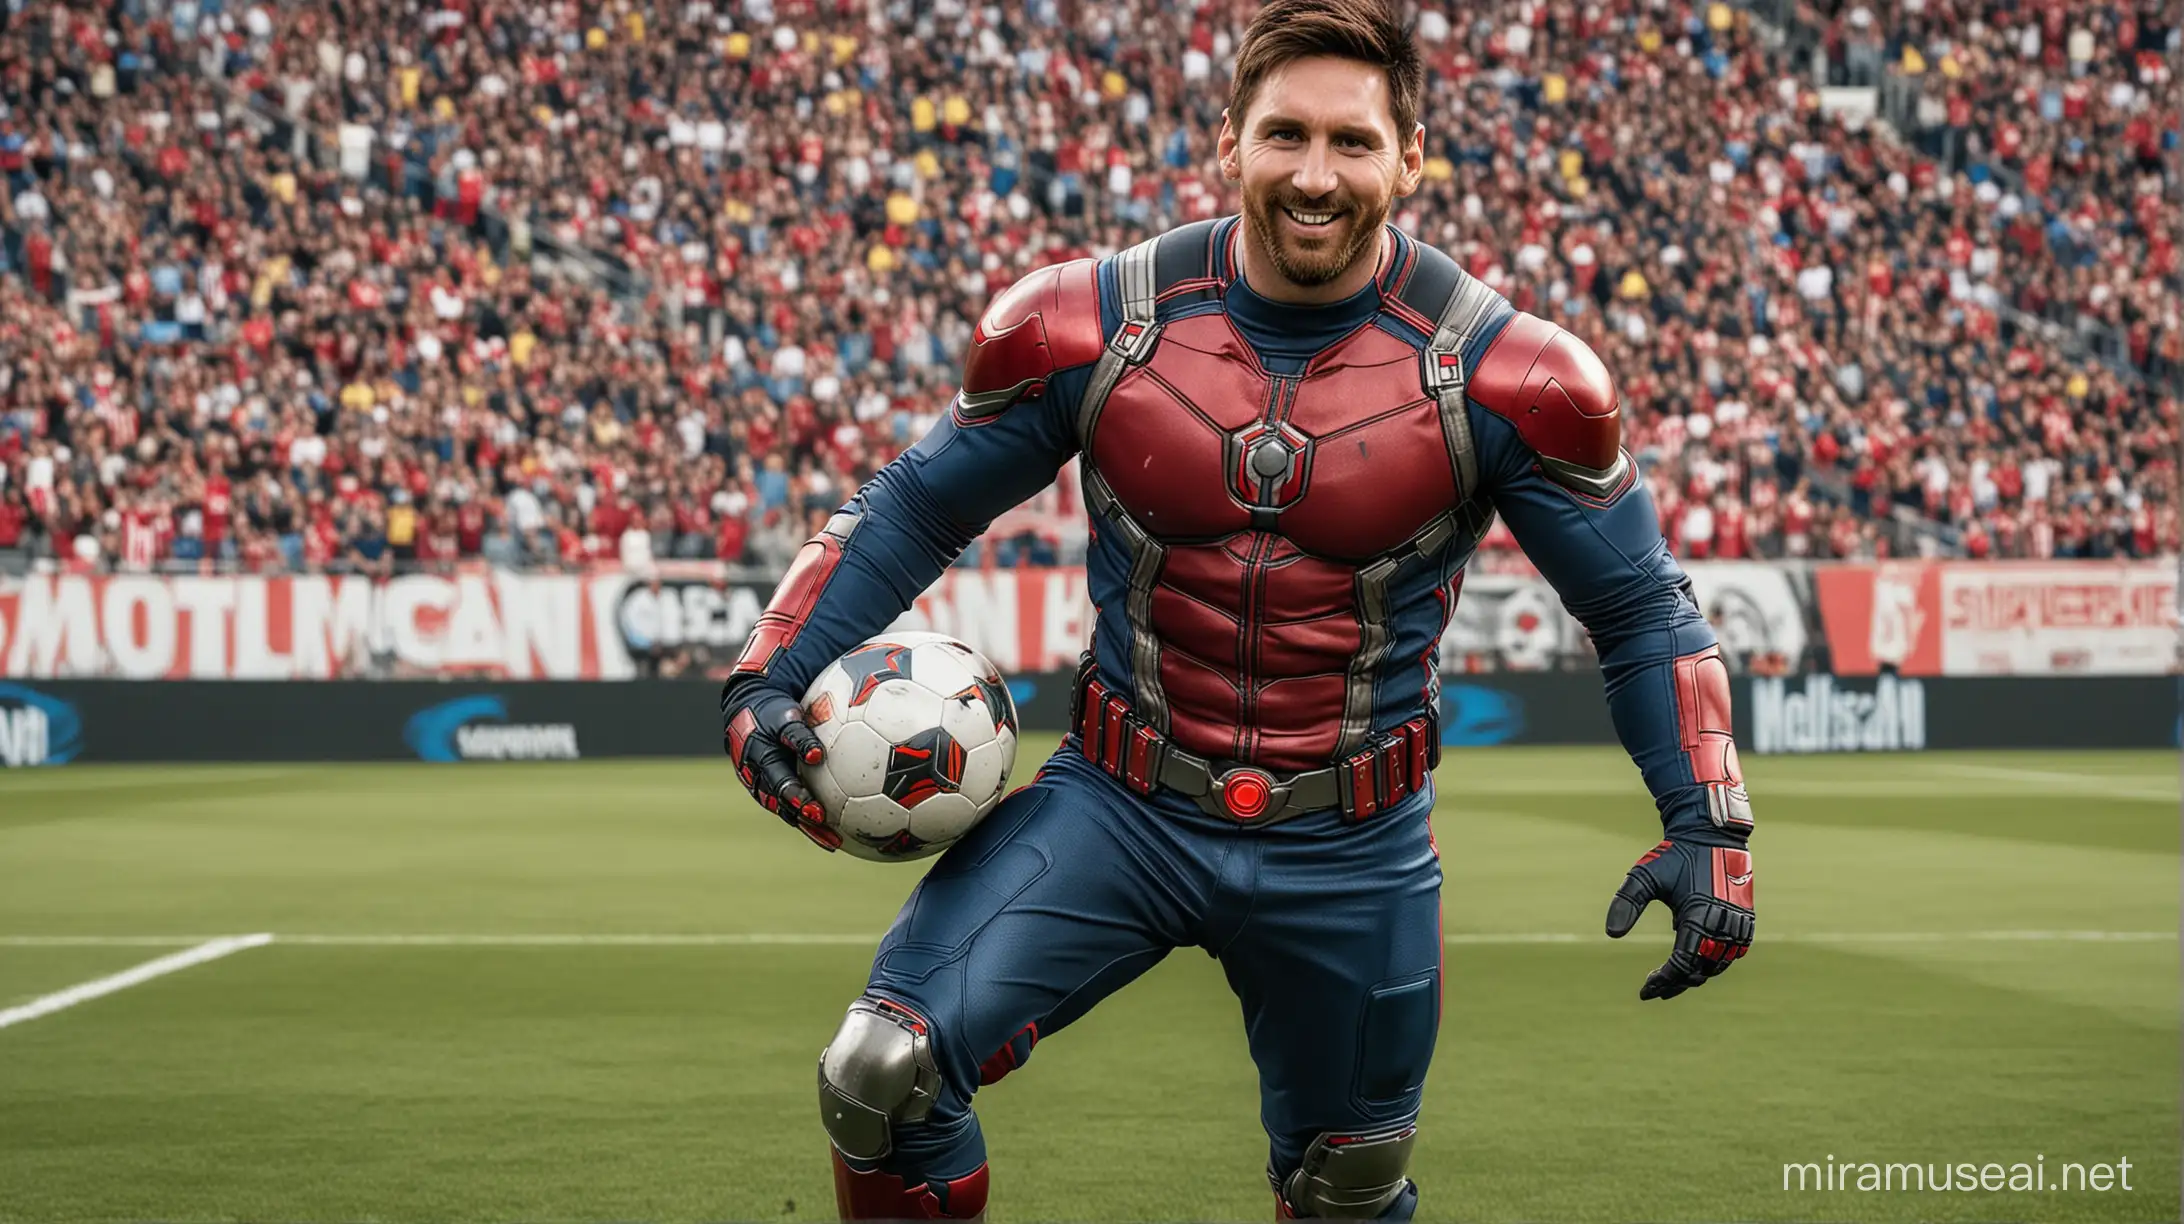 Lionel Messi the Soccer player transformes into the comic book superhero Ant-Man, full body, Looking at the Camera, Super Smiley face, Wearing Ant-Man costume, in the football field, Standing with a ball next to him.
